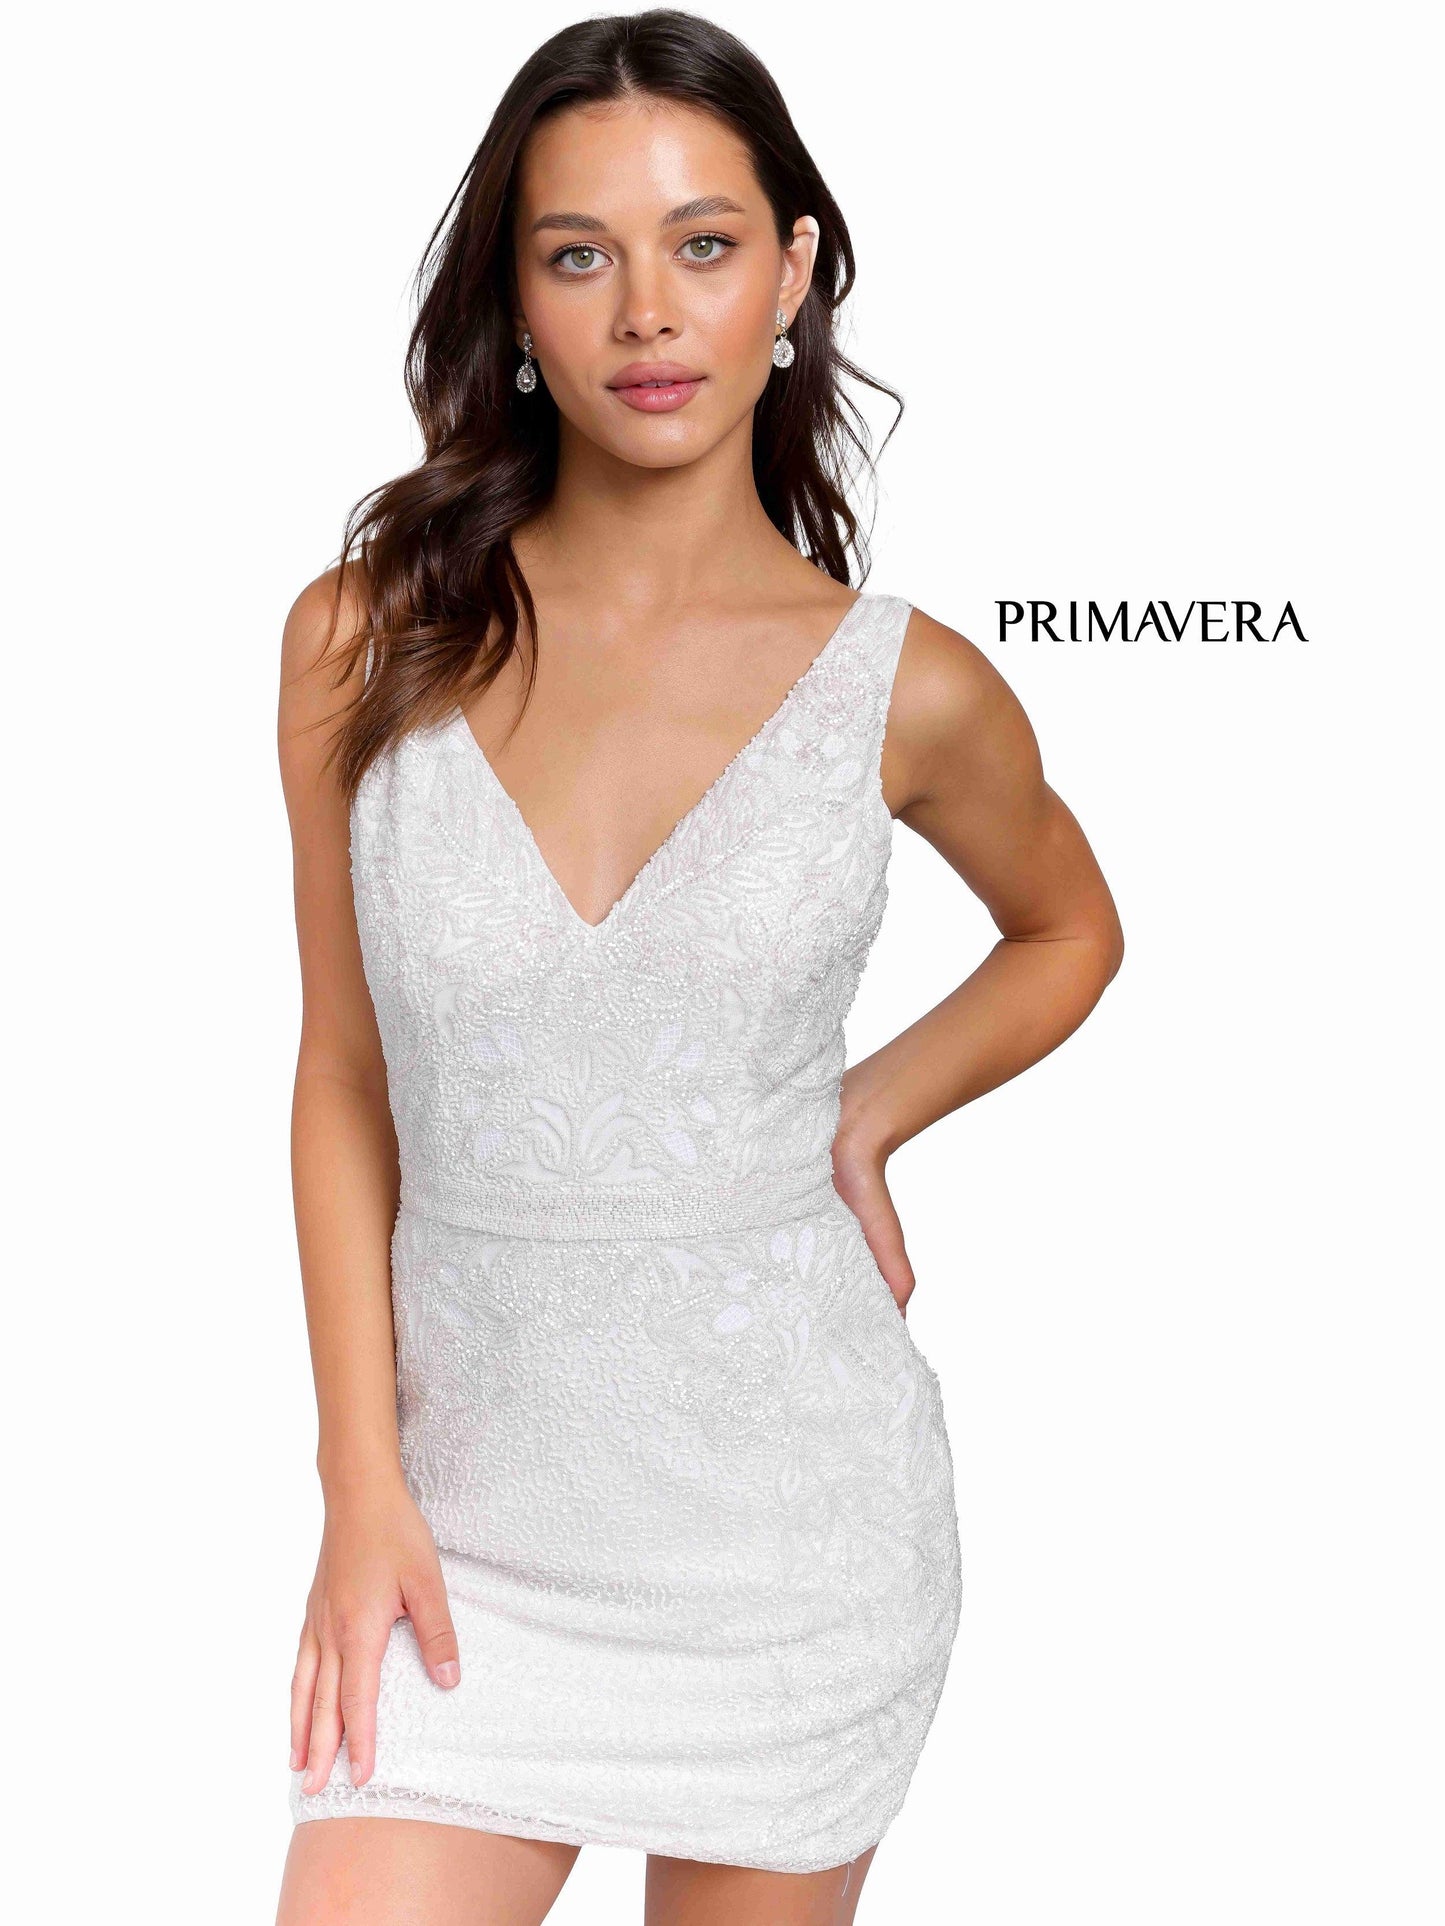 Primavera Couture Short Homecoming Dress 3804 - The Dress Outlet